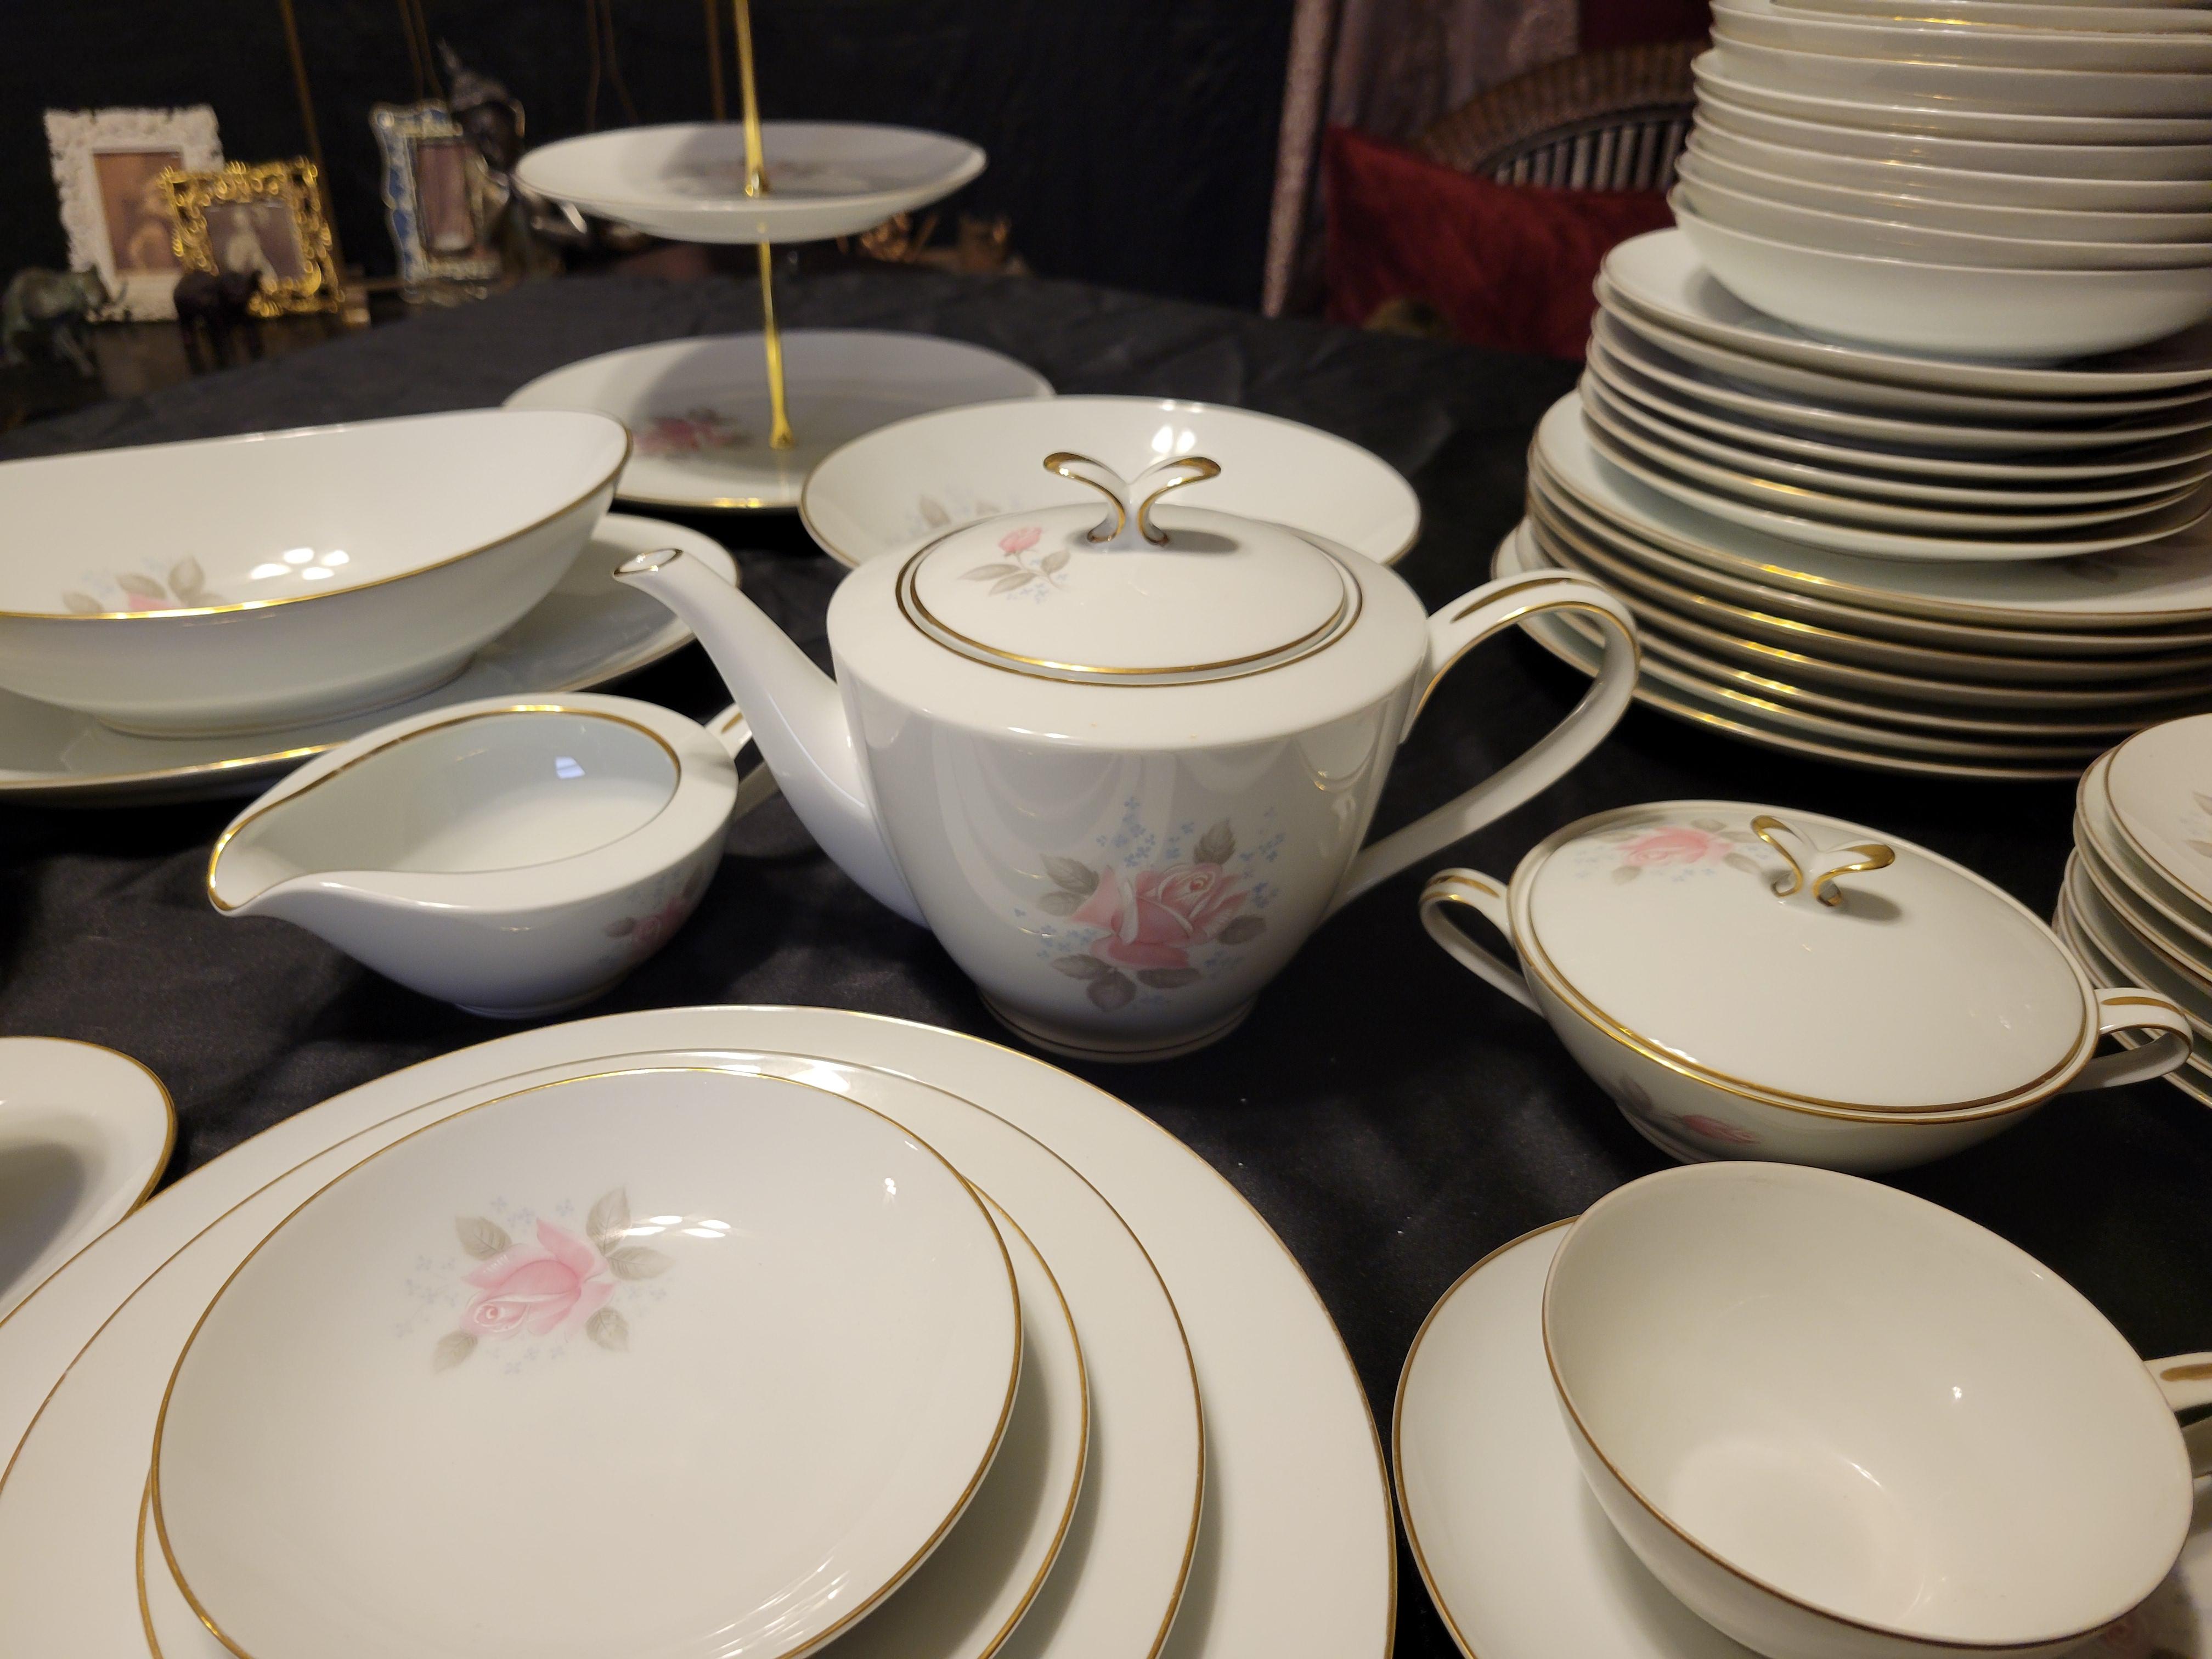 Vintage Noritake 'Roseville' Fine China Dining Set for 8 Persons - 79 Items For Sale 2